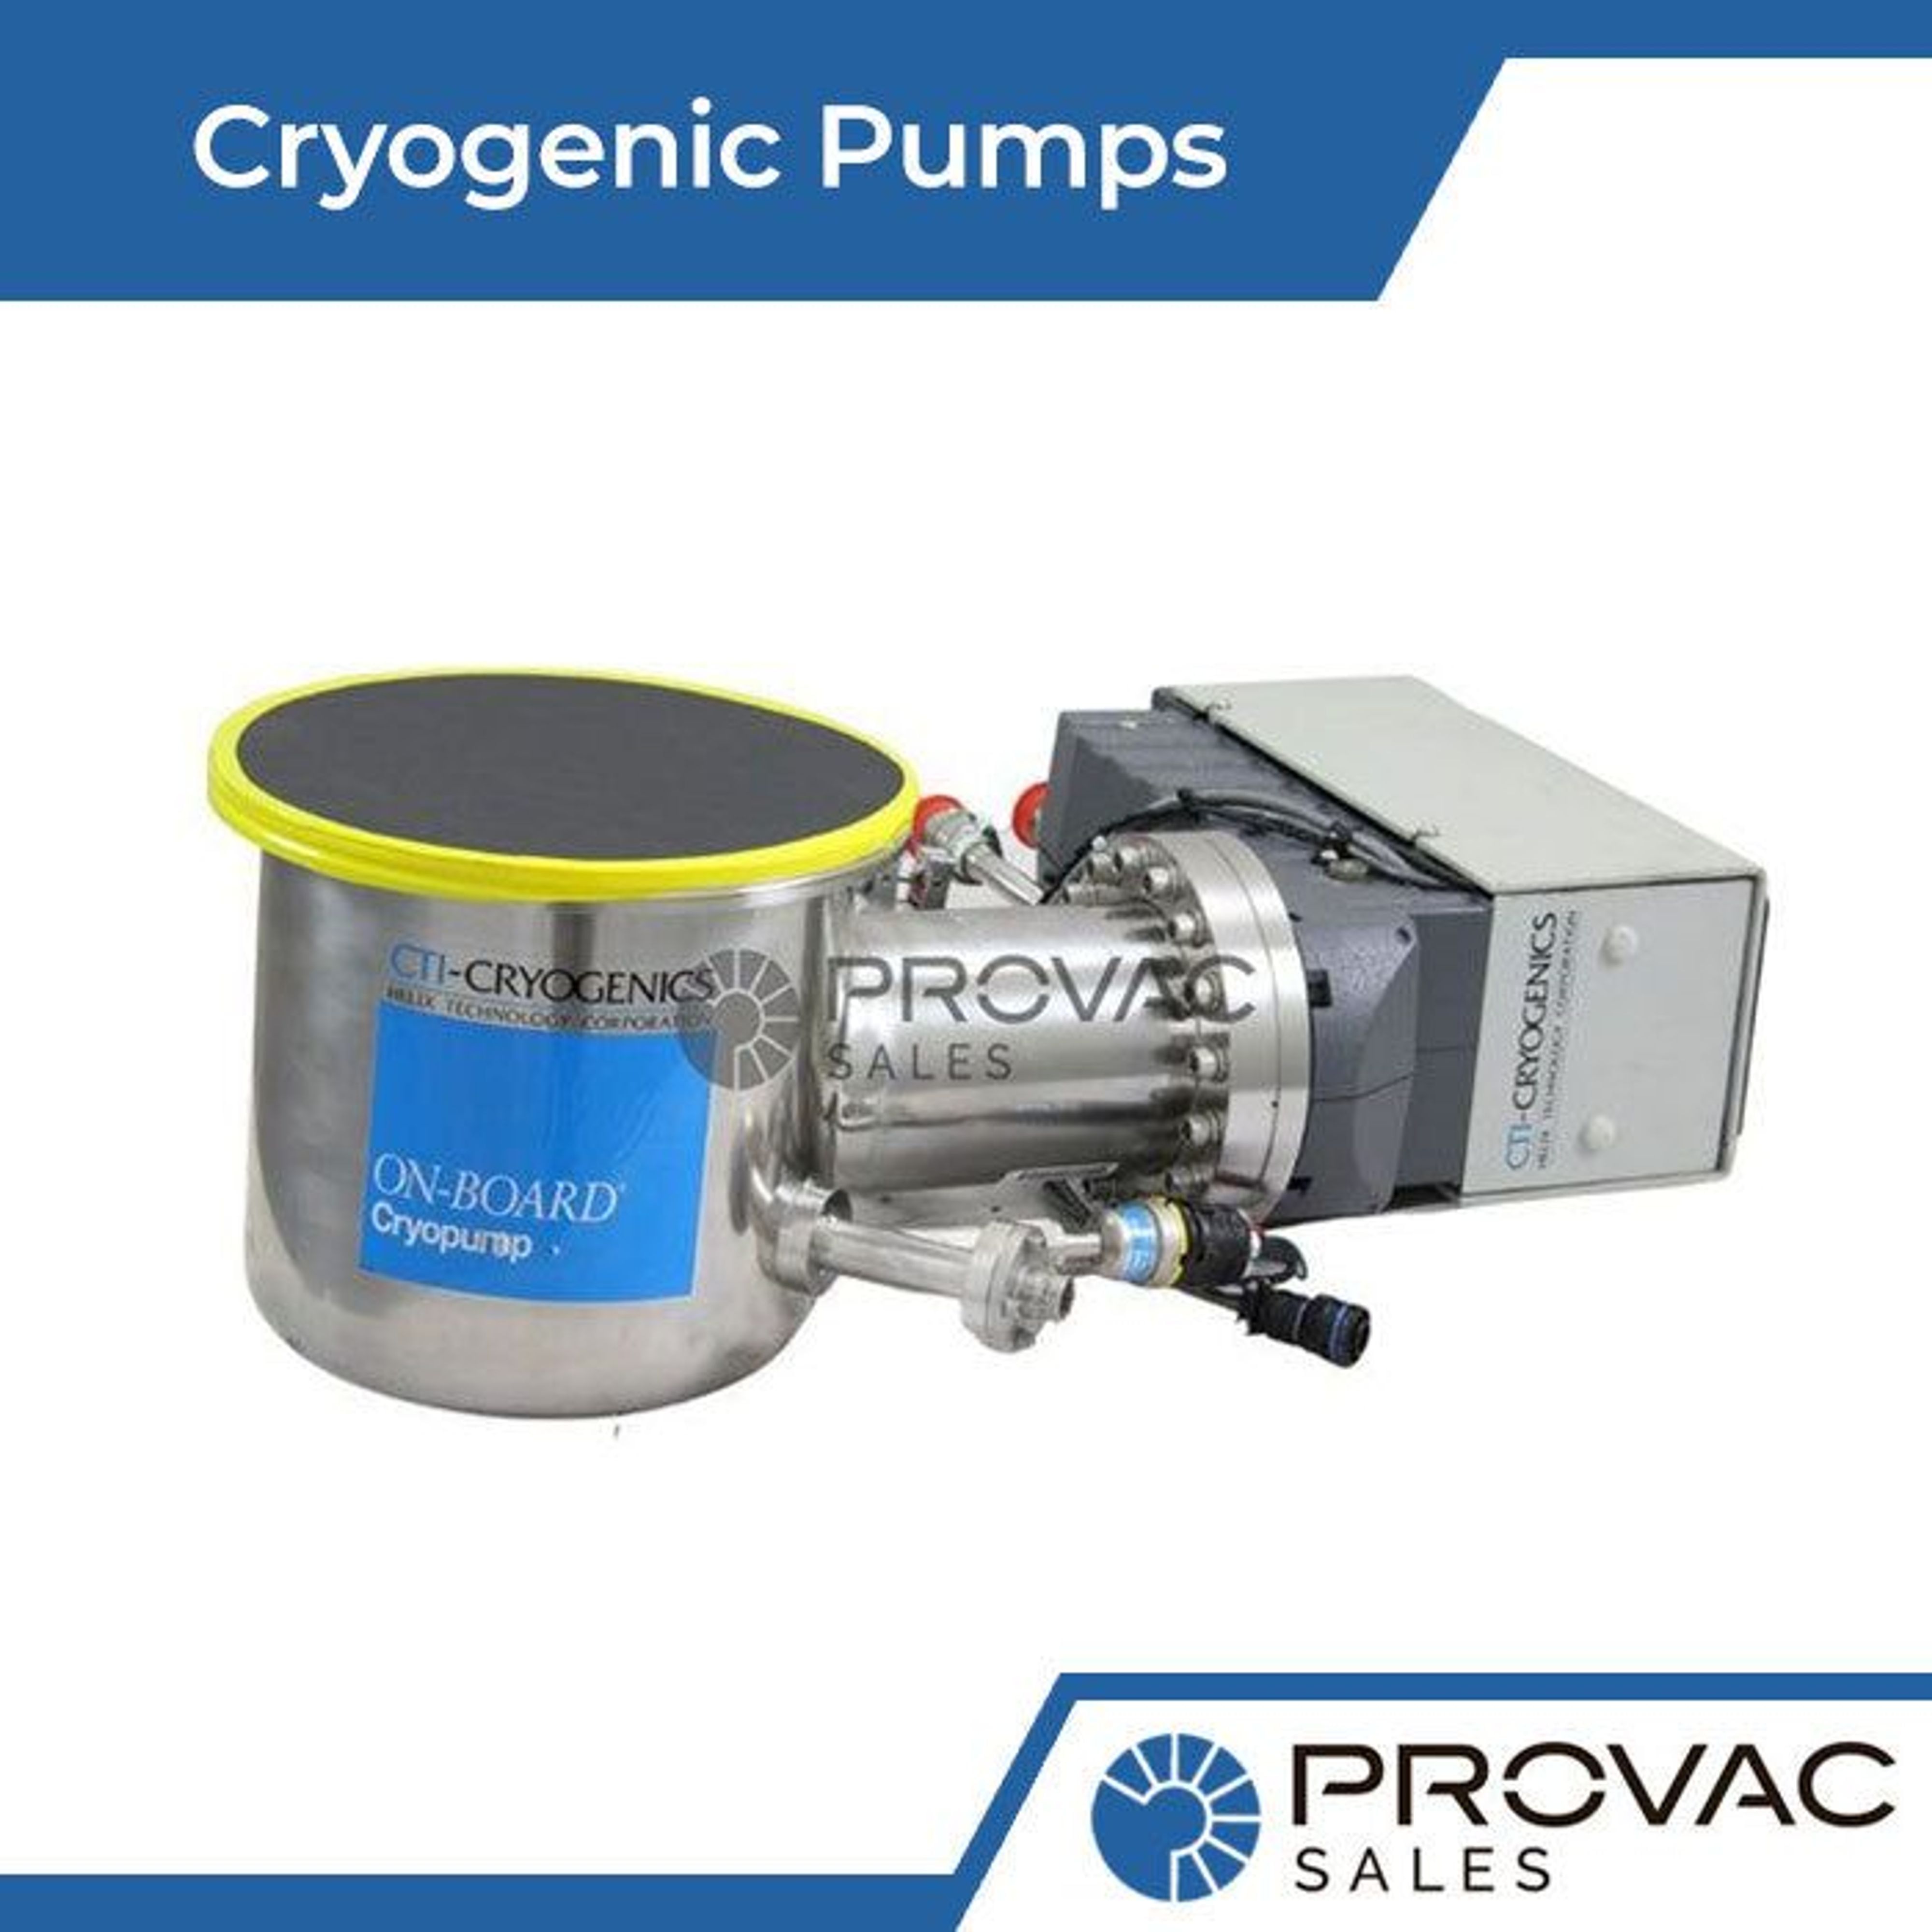 What is a Cryogenic Pump? Background